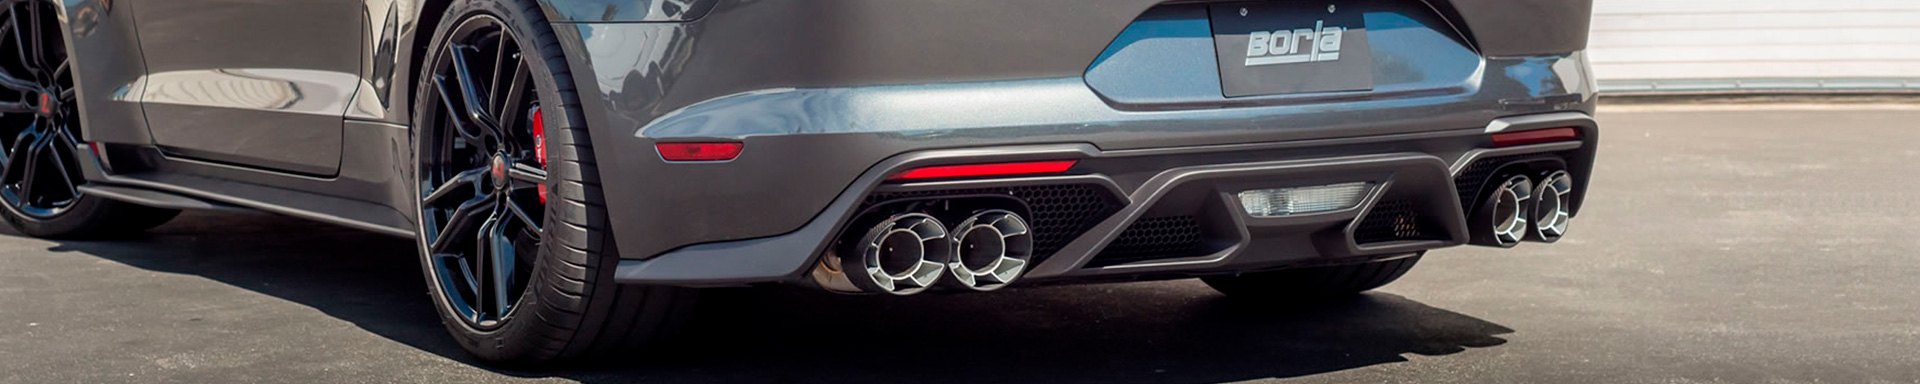 Achieve ATAK Sound with Borla Cat-Back Exhaust System for Ford Mustang